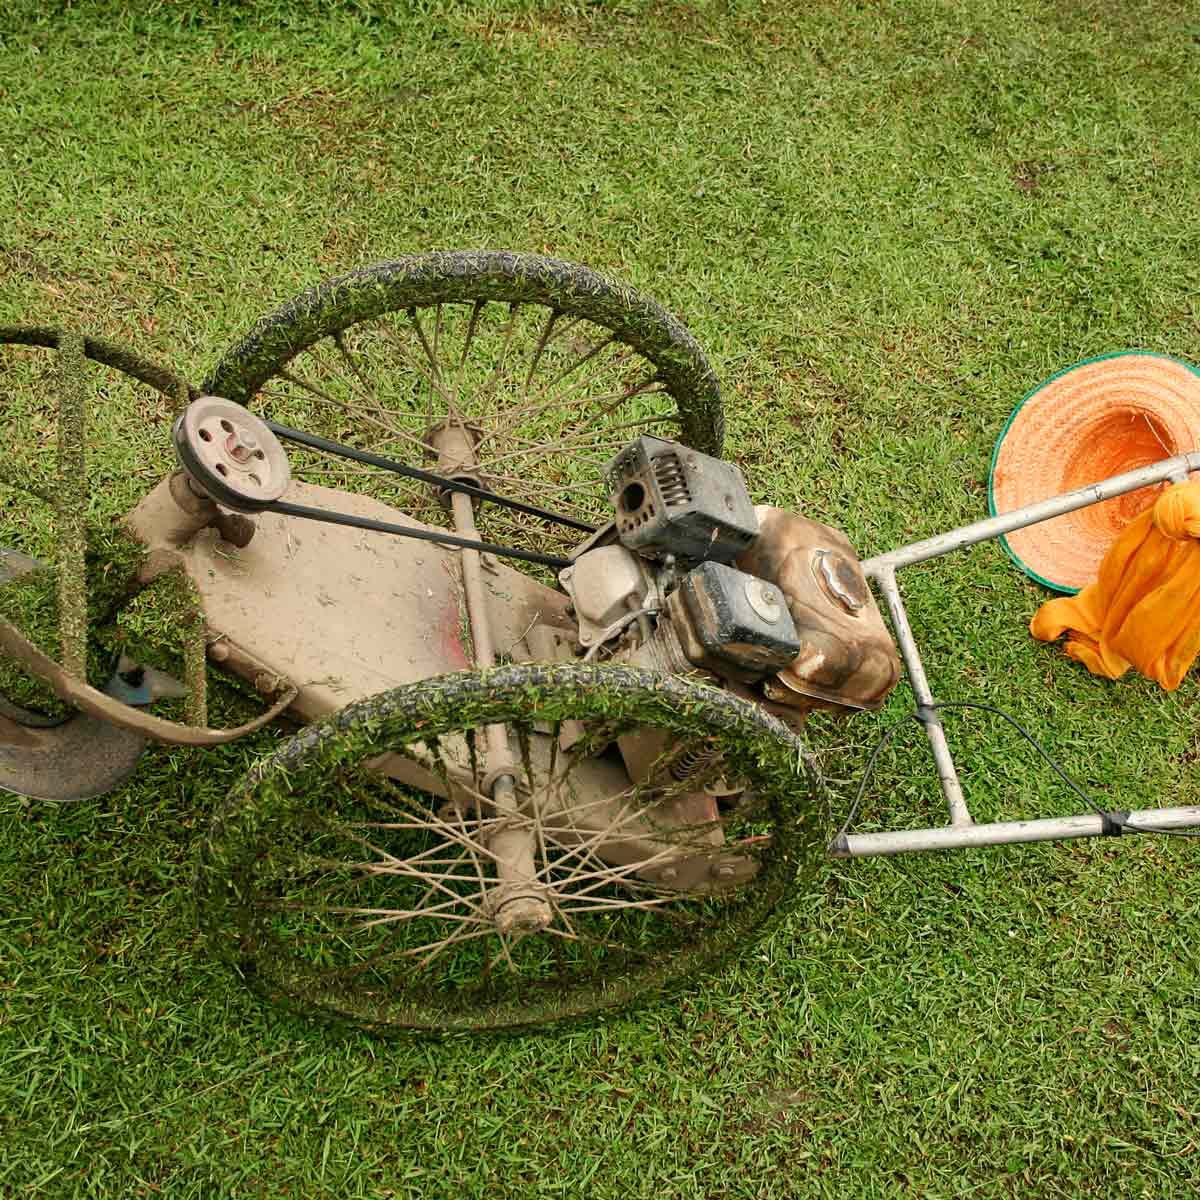 Antique Vintage, ORGINIAL Great States Lawn Push Reel Mower, Without Roller  & Br